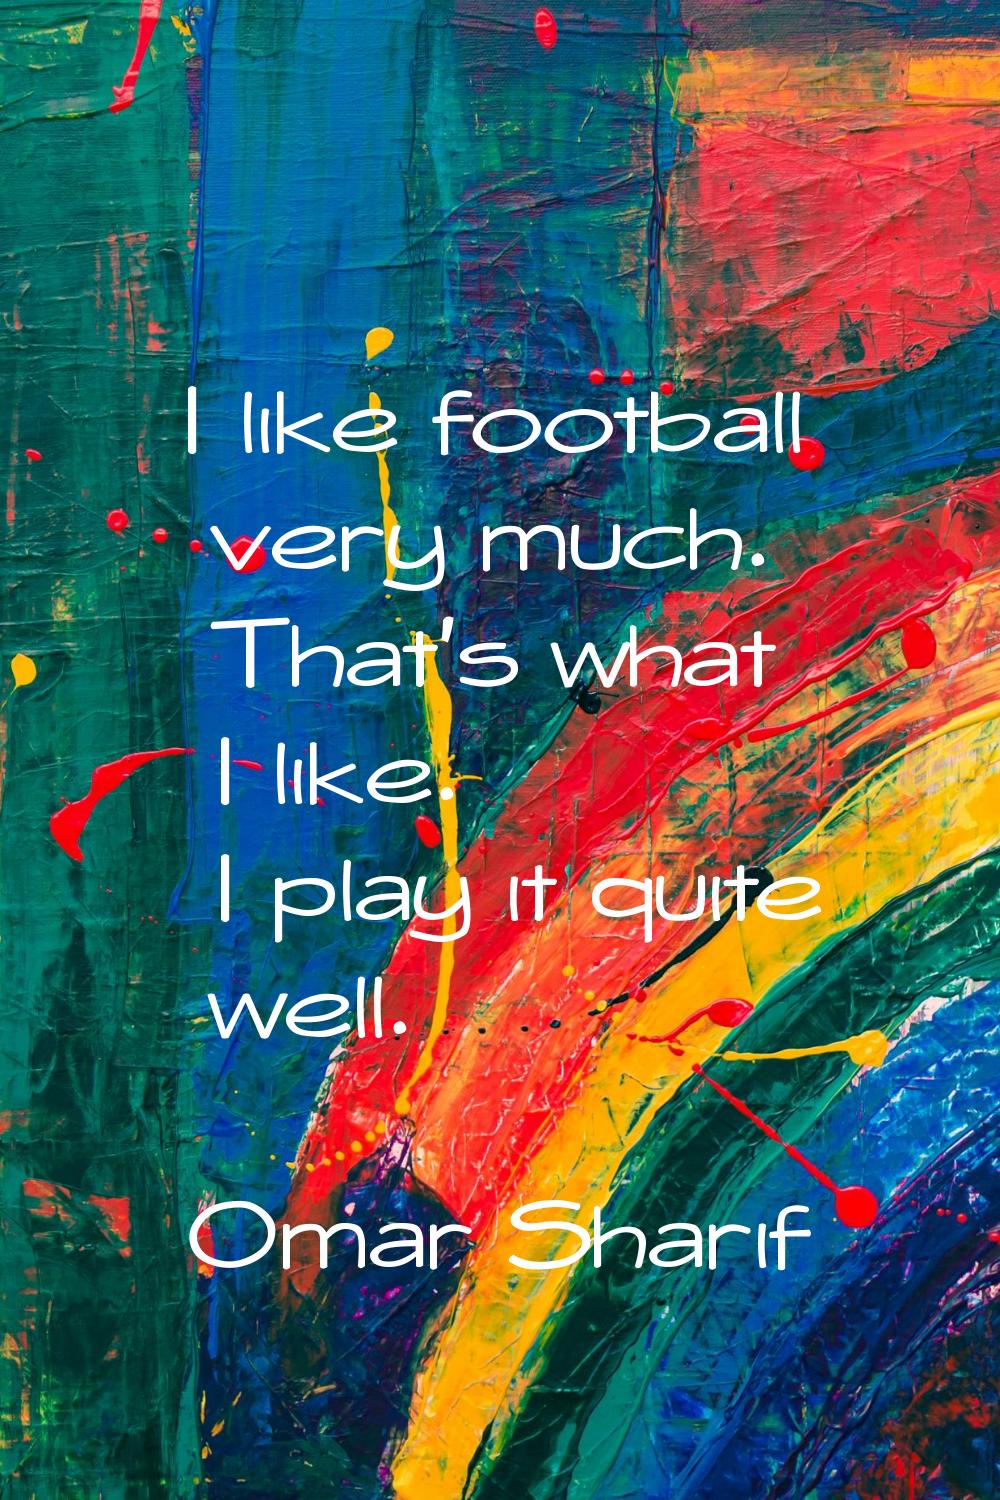 I like football very much. That's what I like. I play it quite well.